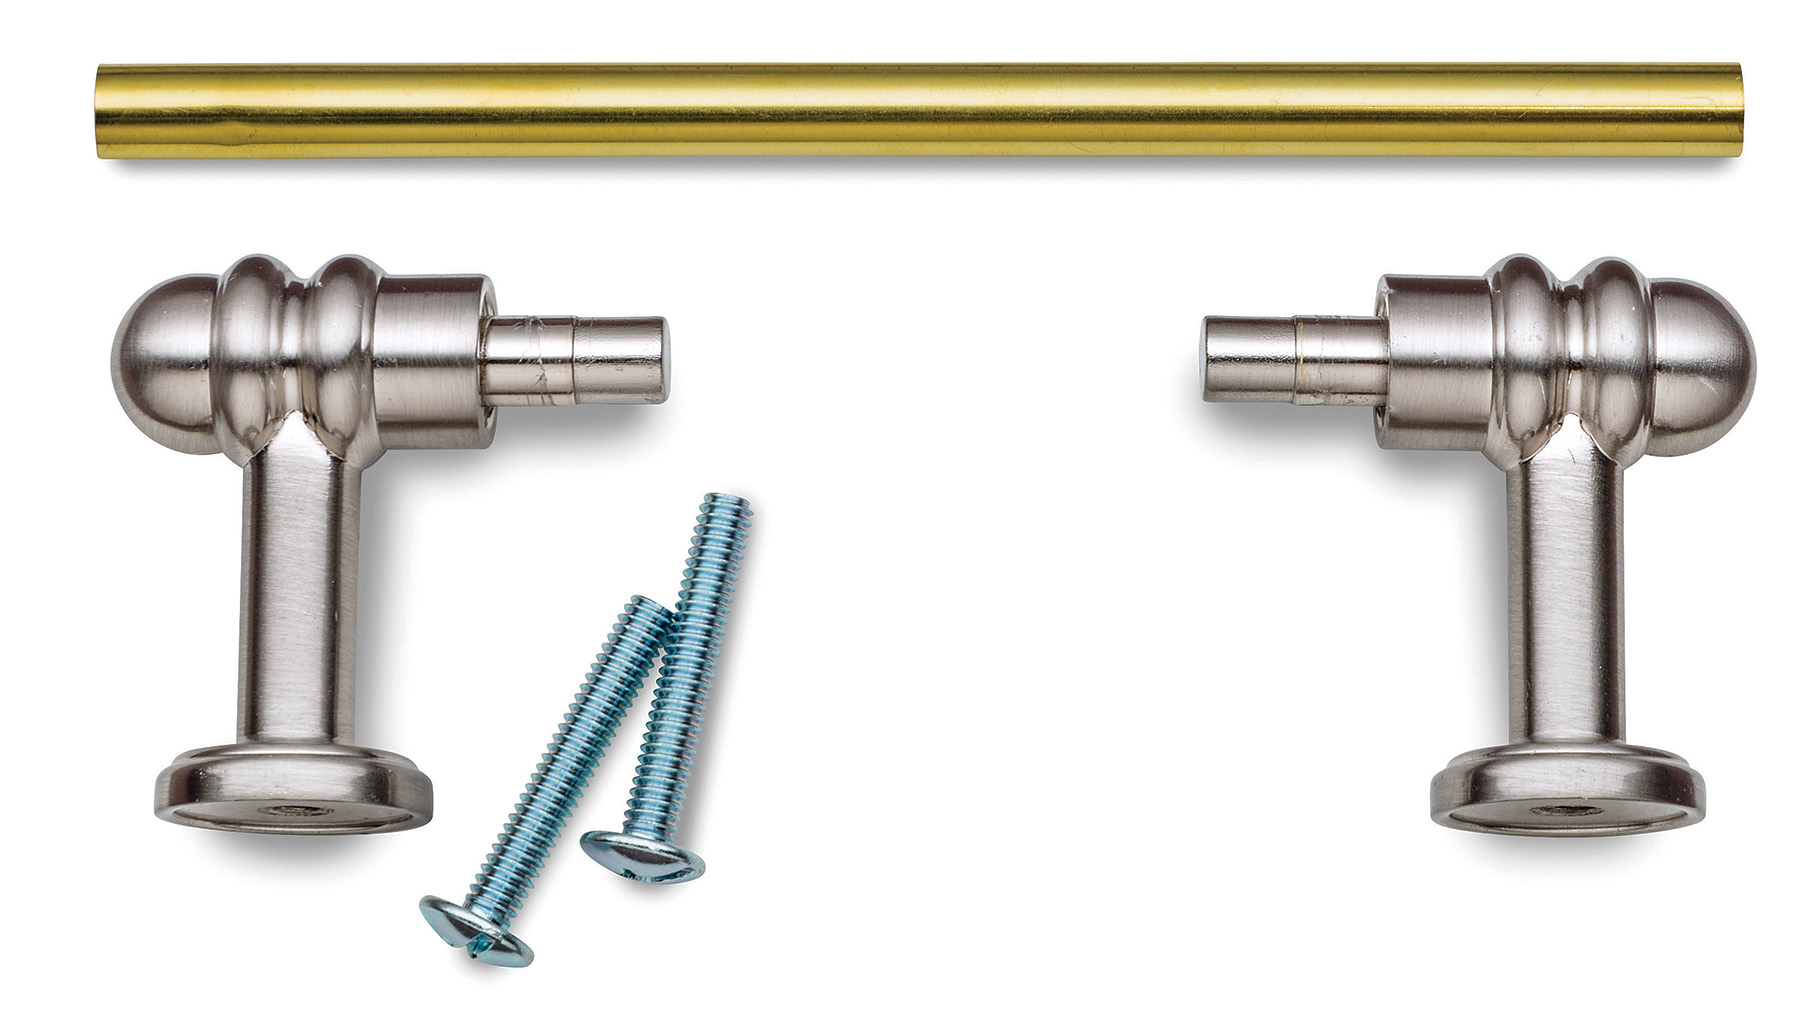 To make turning easy, the Custom Pull Kits use 7mm brass tubes, which are common in many pen kits and allow for turning with a standard pen mandrel.